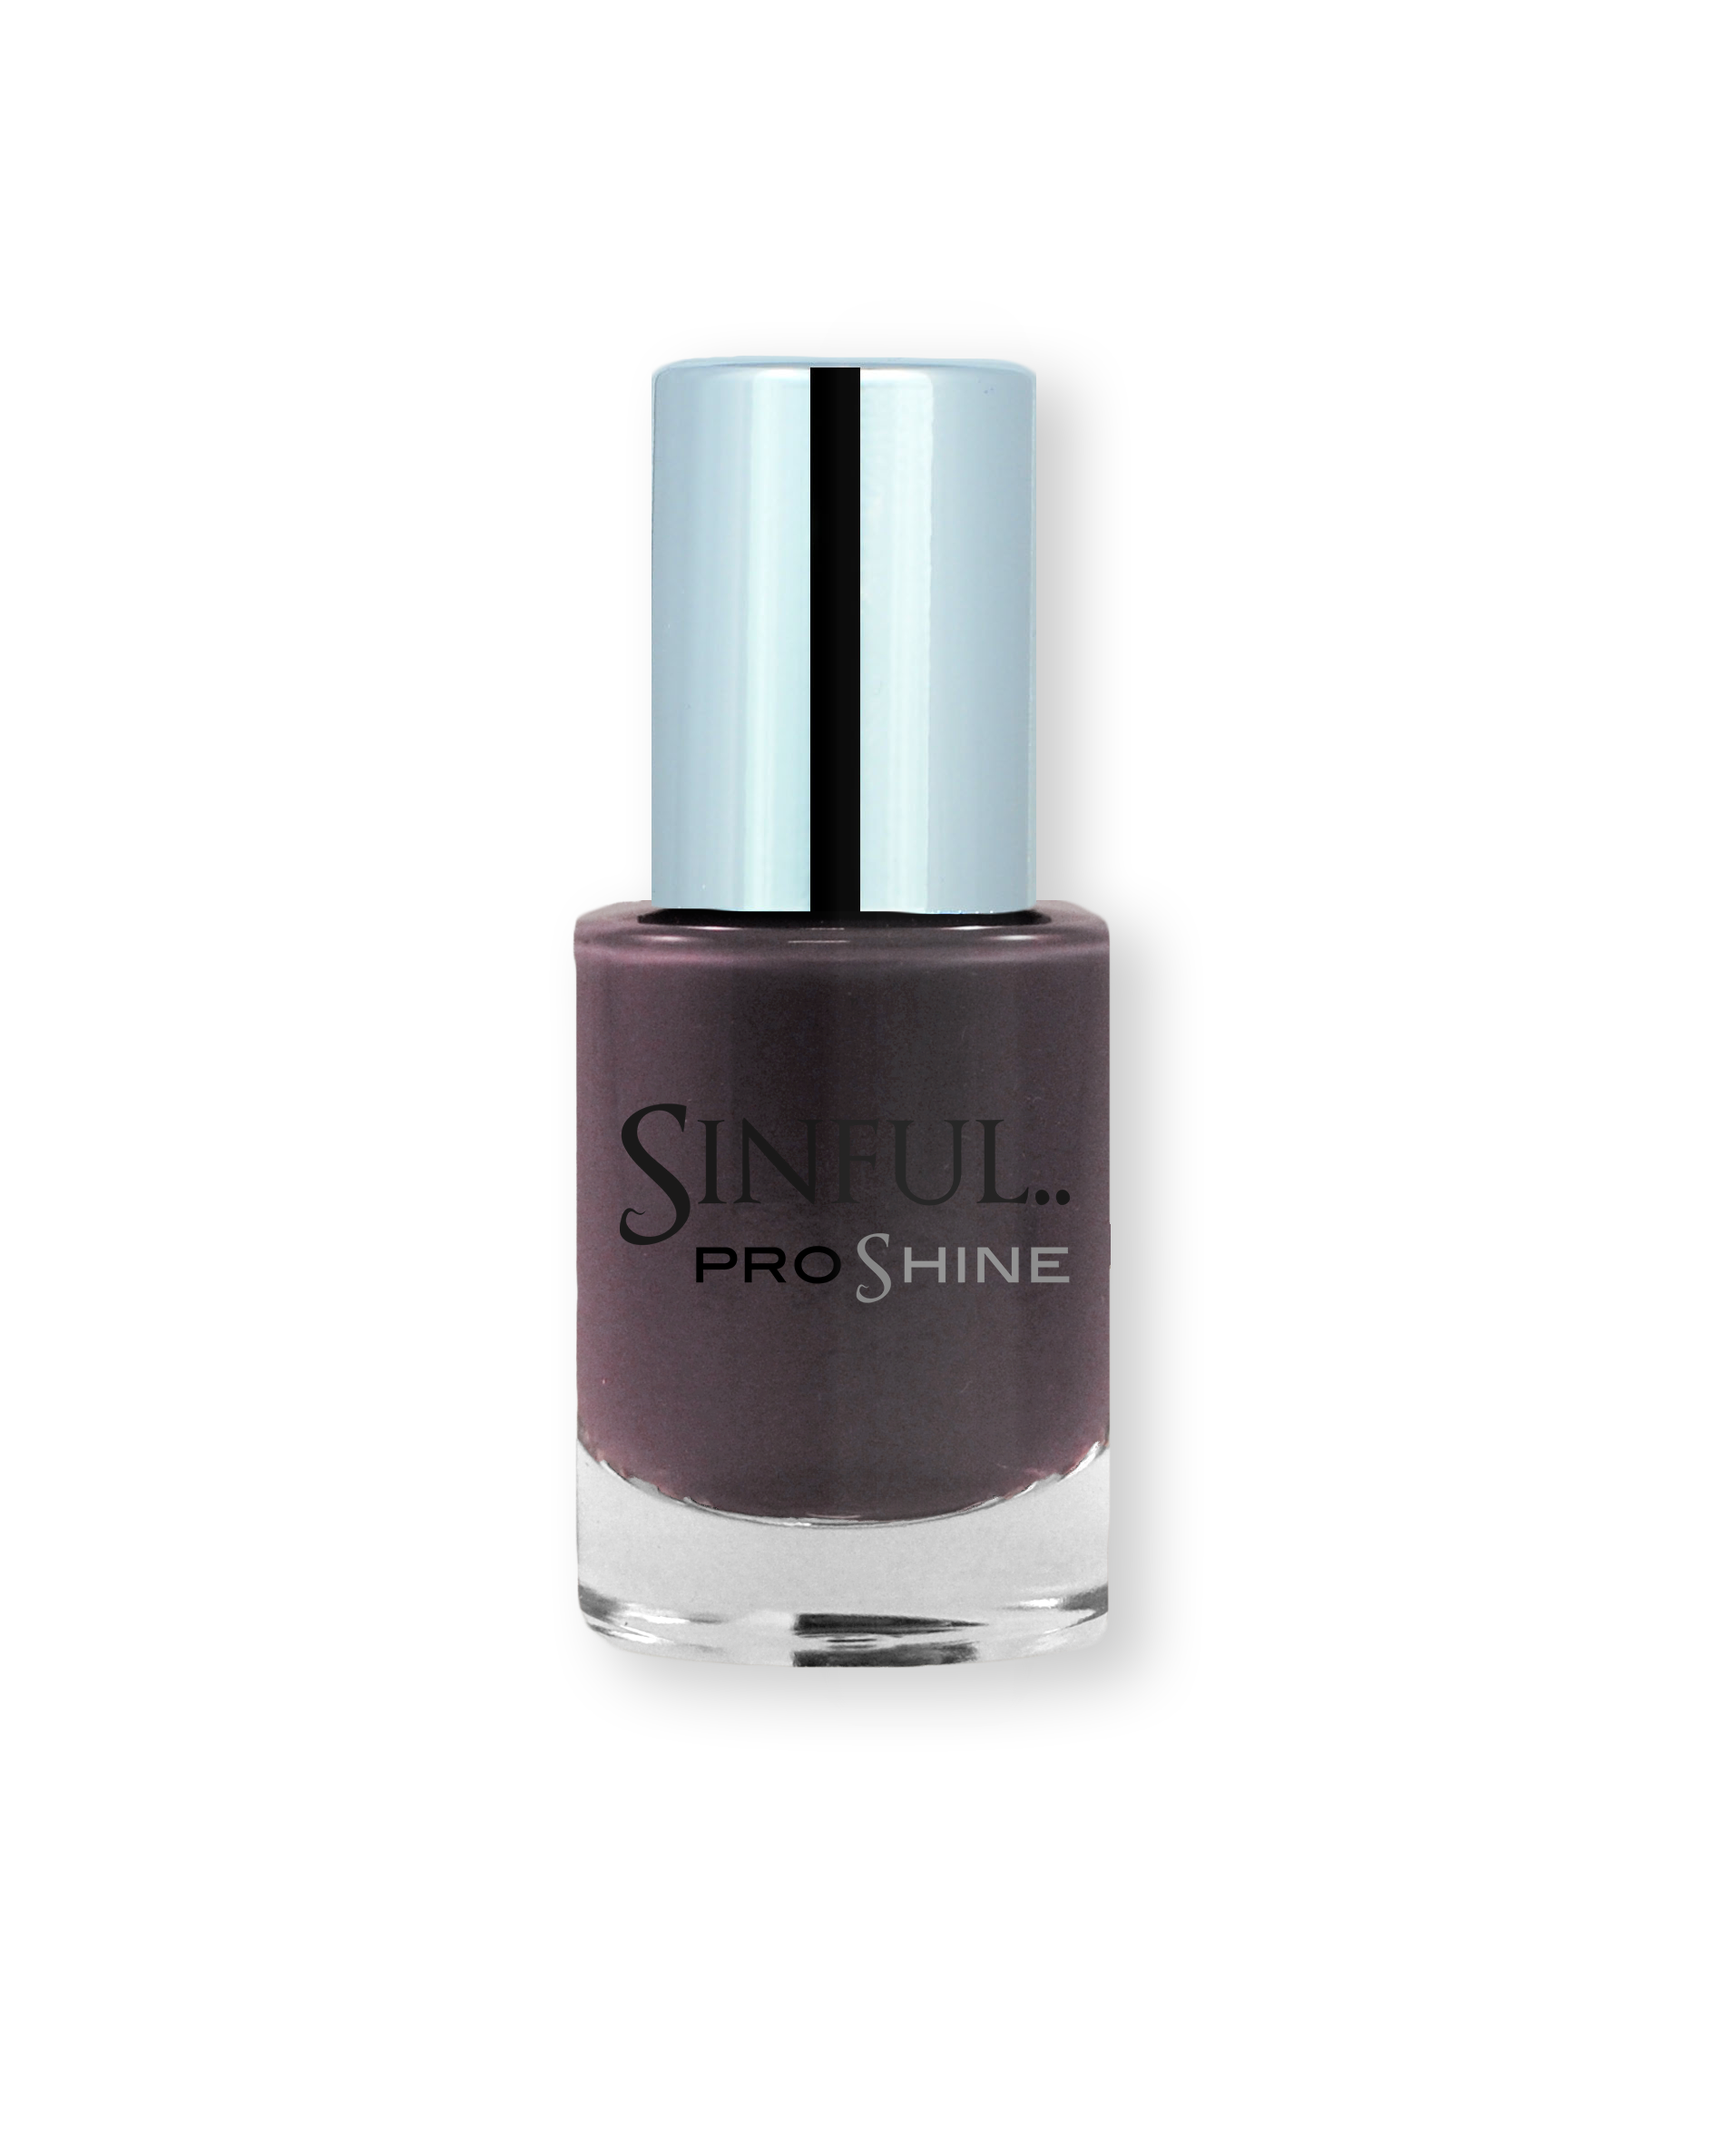 A reinvented classic; deep chocolate red is the ultimate shade for a luscious manicure.